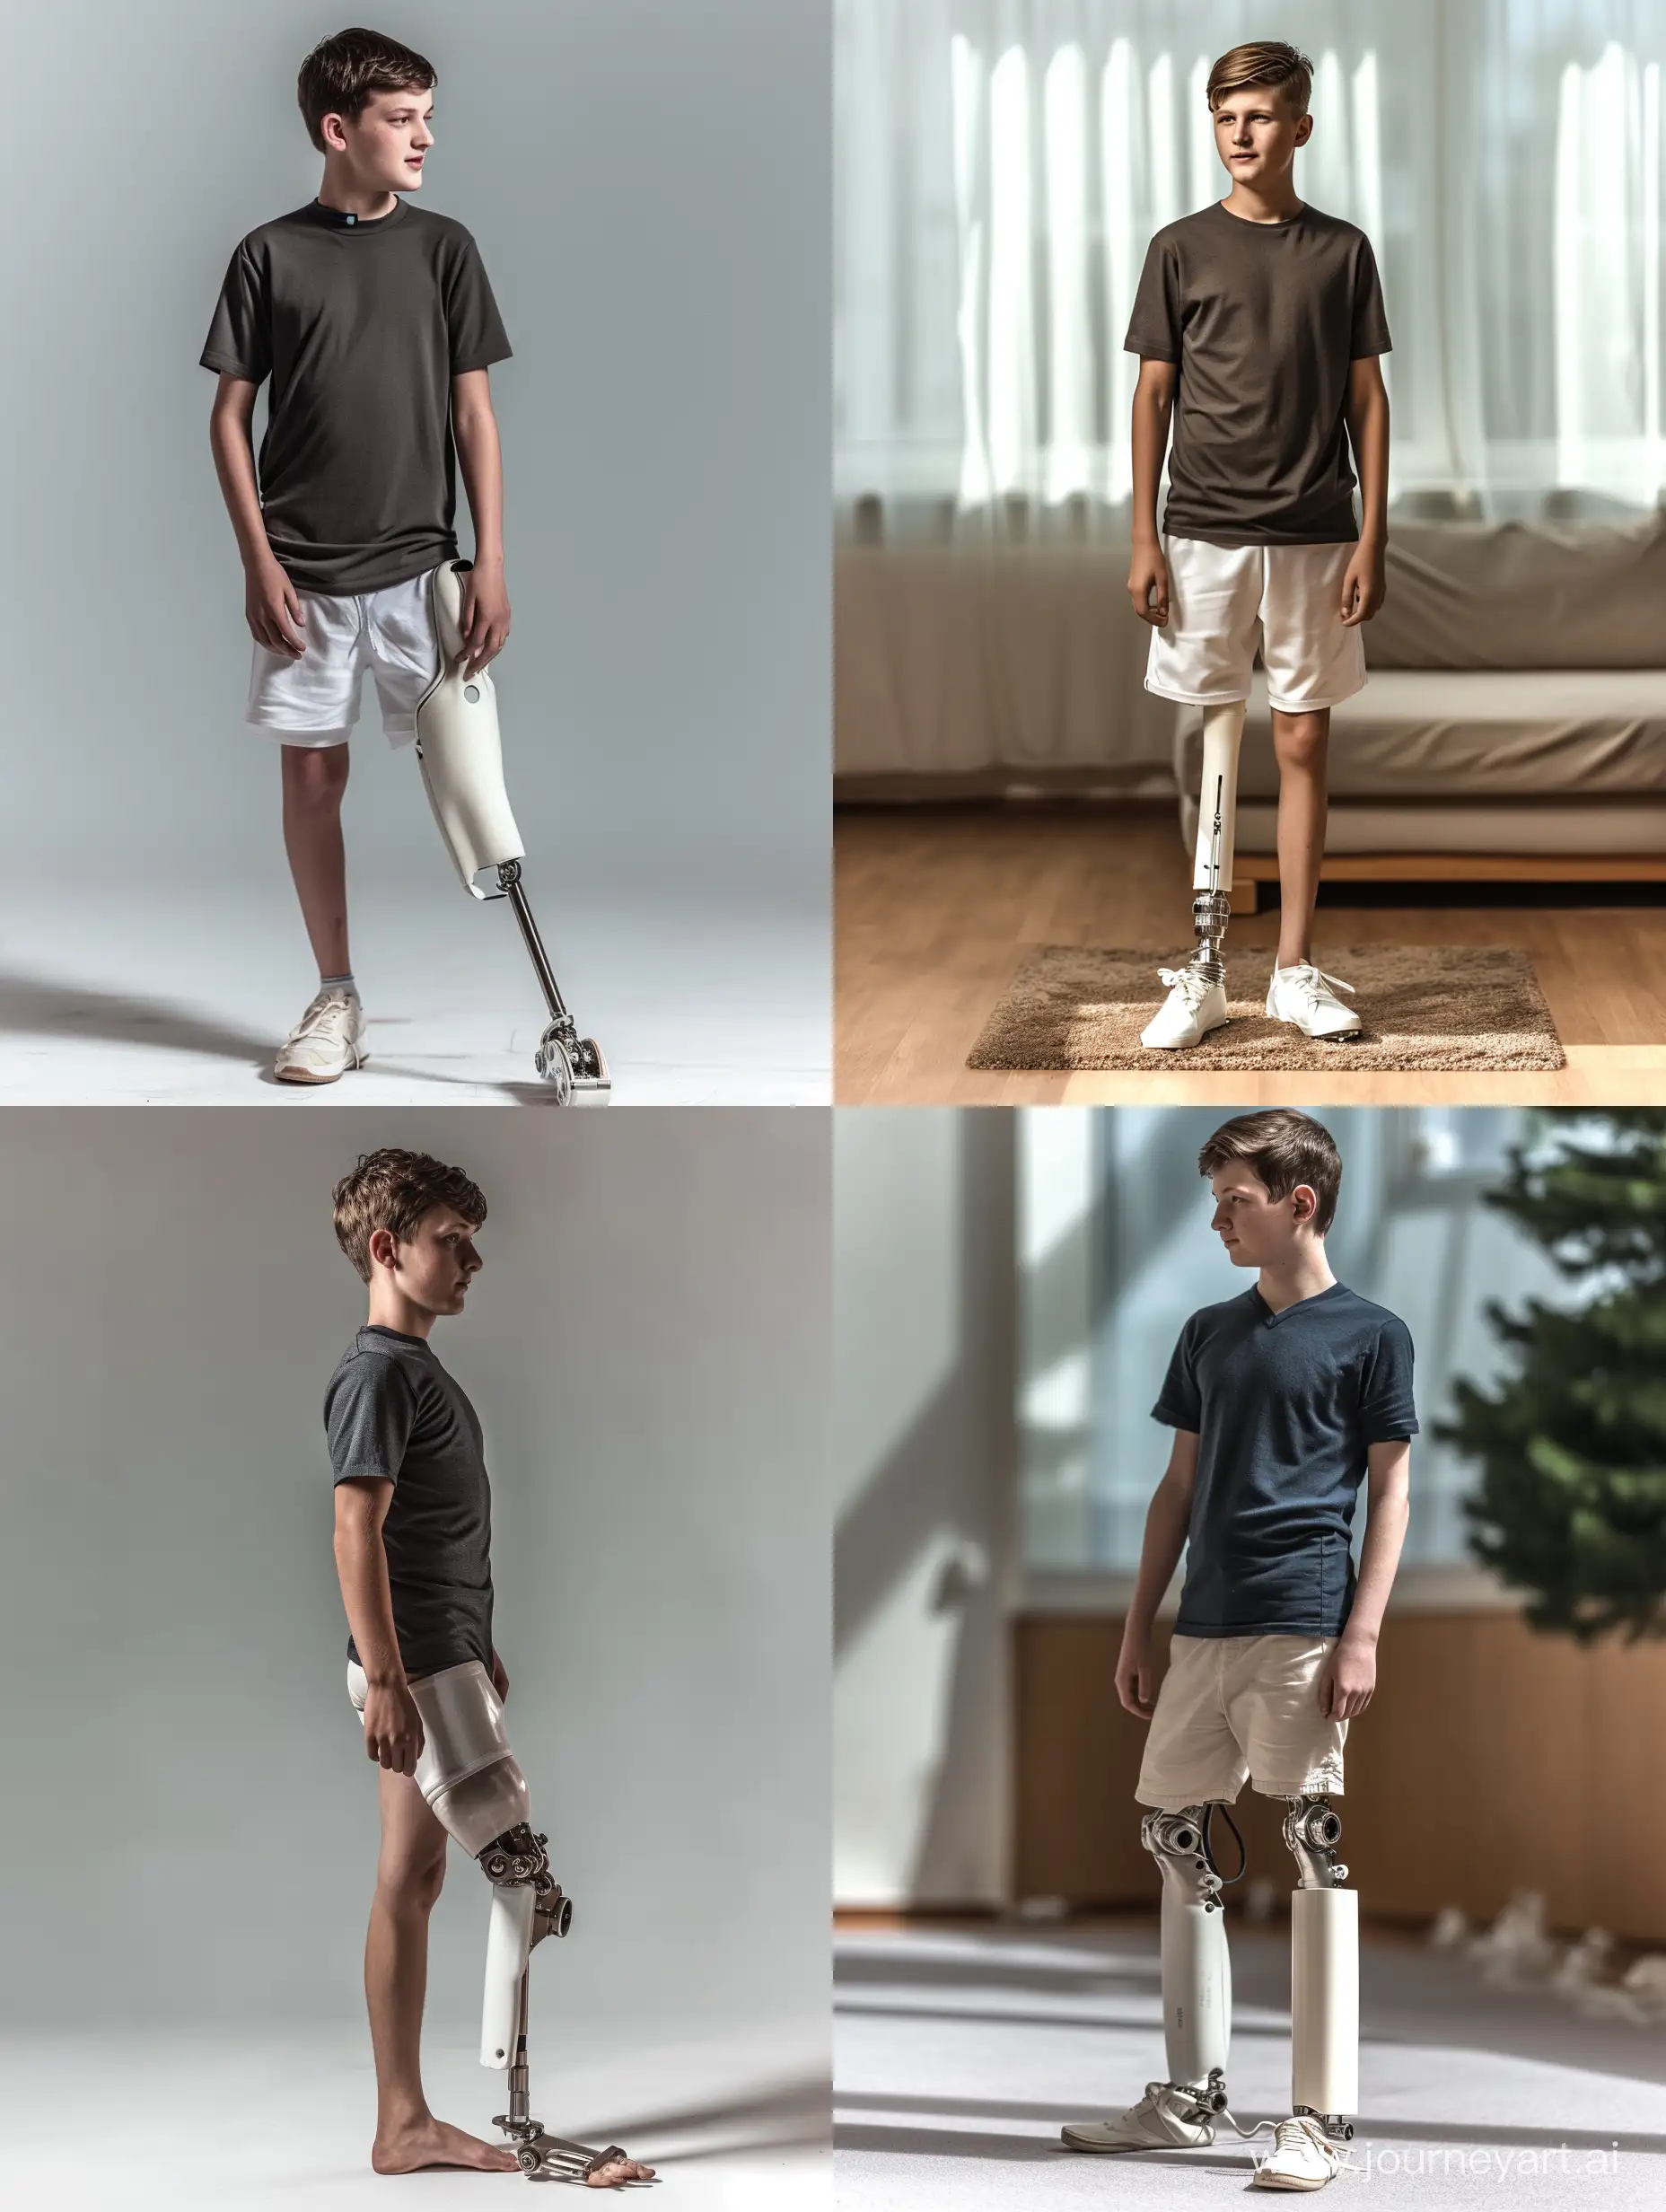 ultrarealistic and photorealistic, ultrarealistic teenager standing showing his new white transtibial prosthesis on his right leg, mechanical leg, modern style, ultrarealistic photography, high technology, digital, masterpiece, 32k UHD resolution, high quality, professional photography

